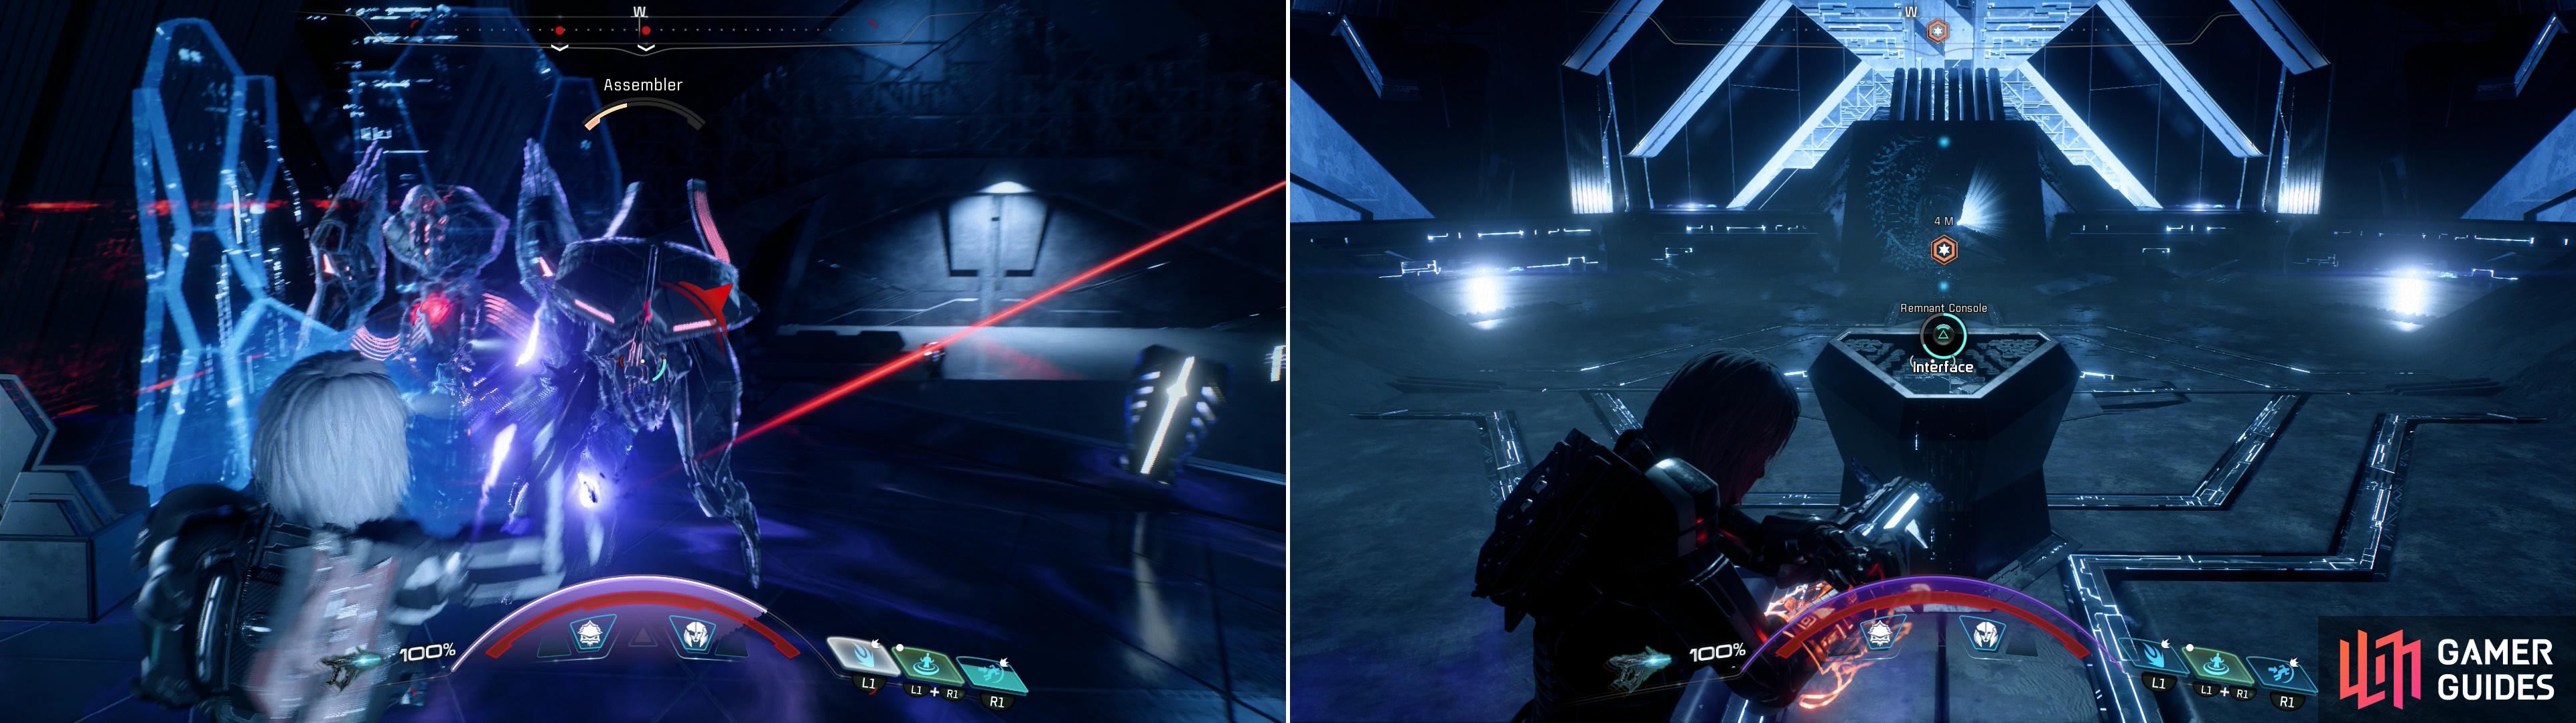 The Remnant will put up a stiff defense (left), fight through them and launch a Remnant ship (right).